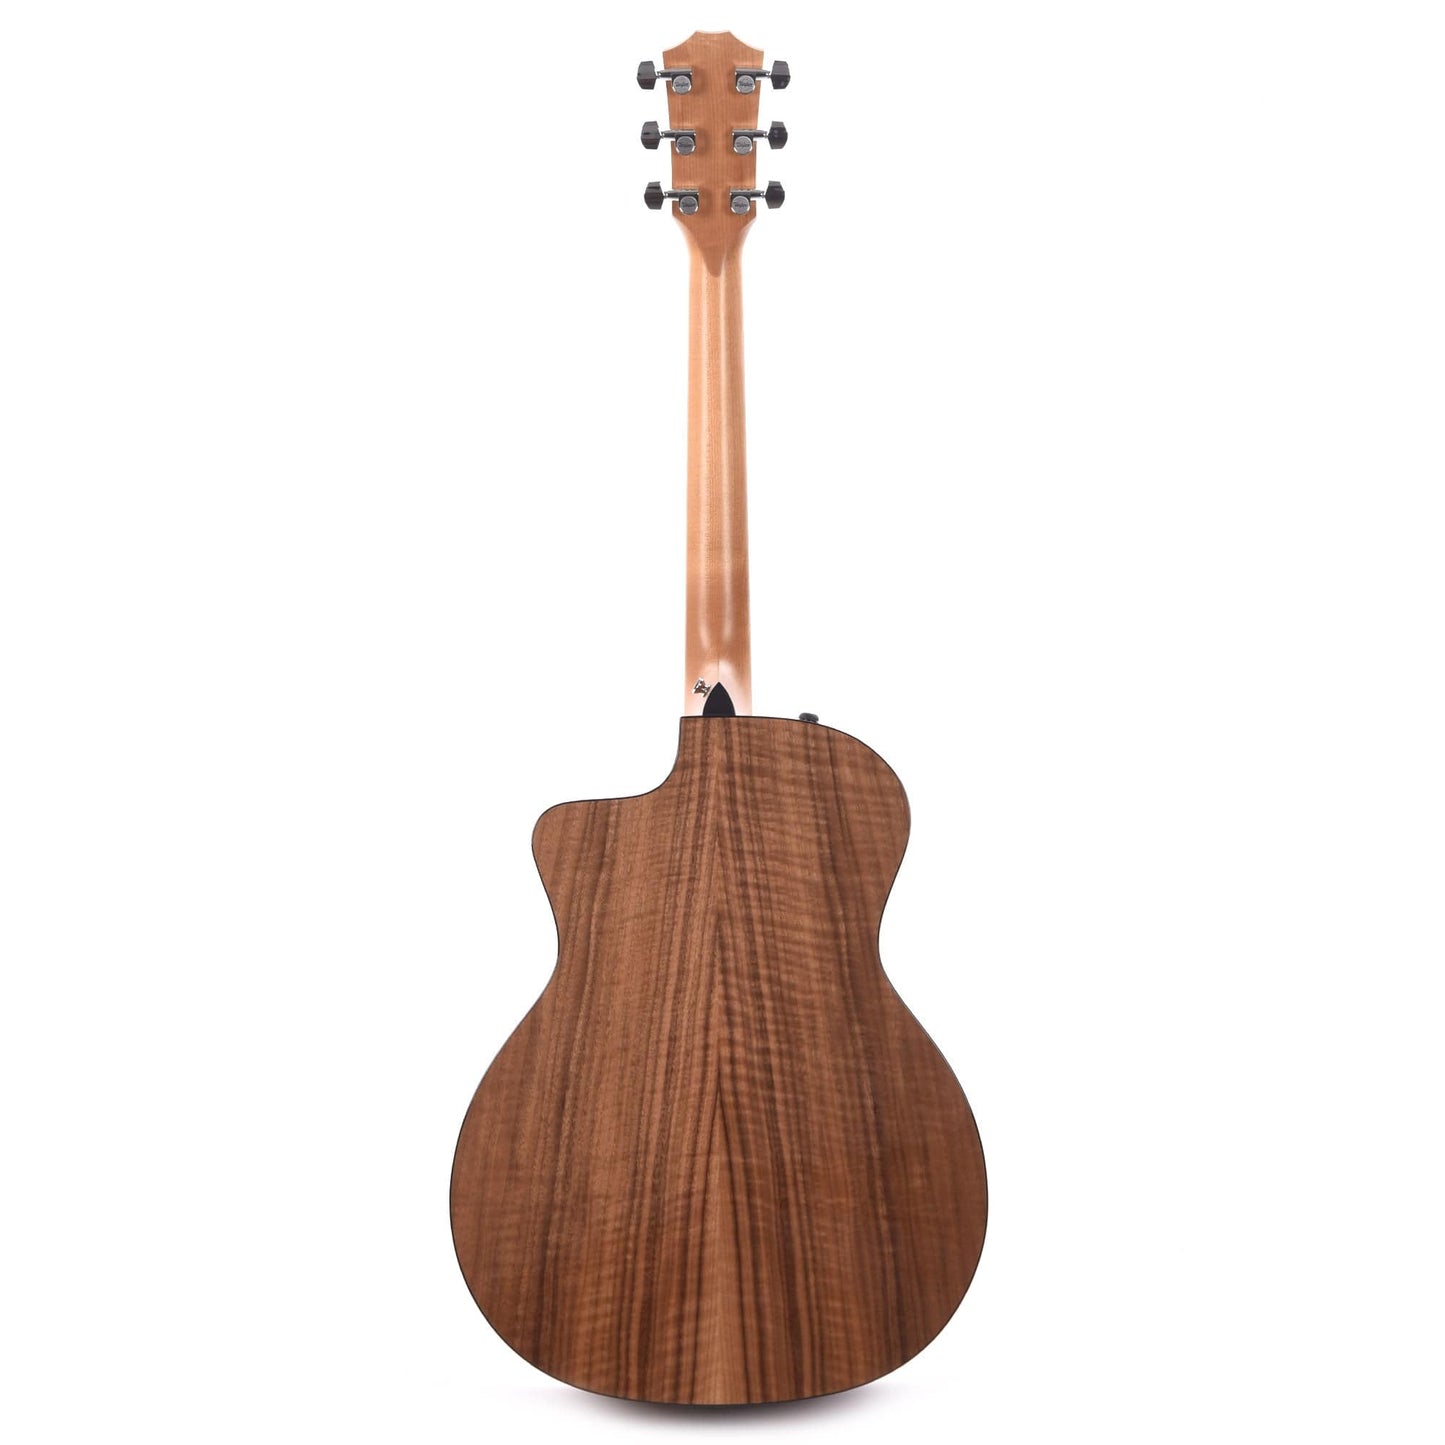 Taylor 114ce Special Edition Grand Auditorium Spruce/Walnut Natural Acoustic Guitars / OM and Auditorium